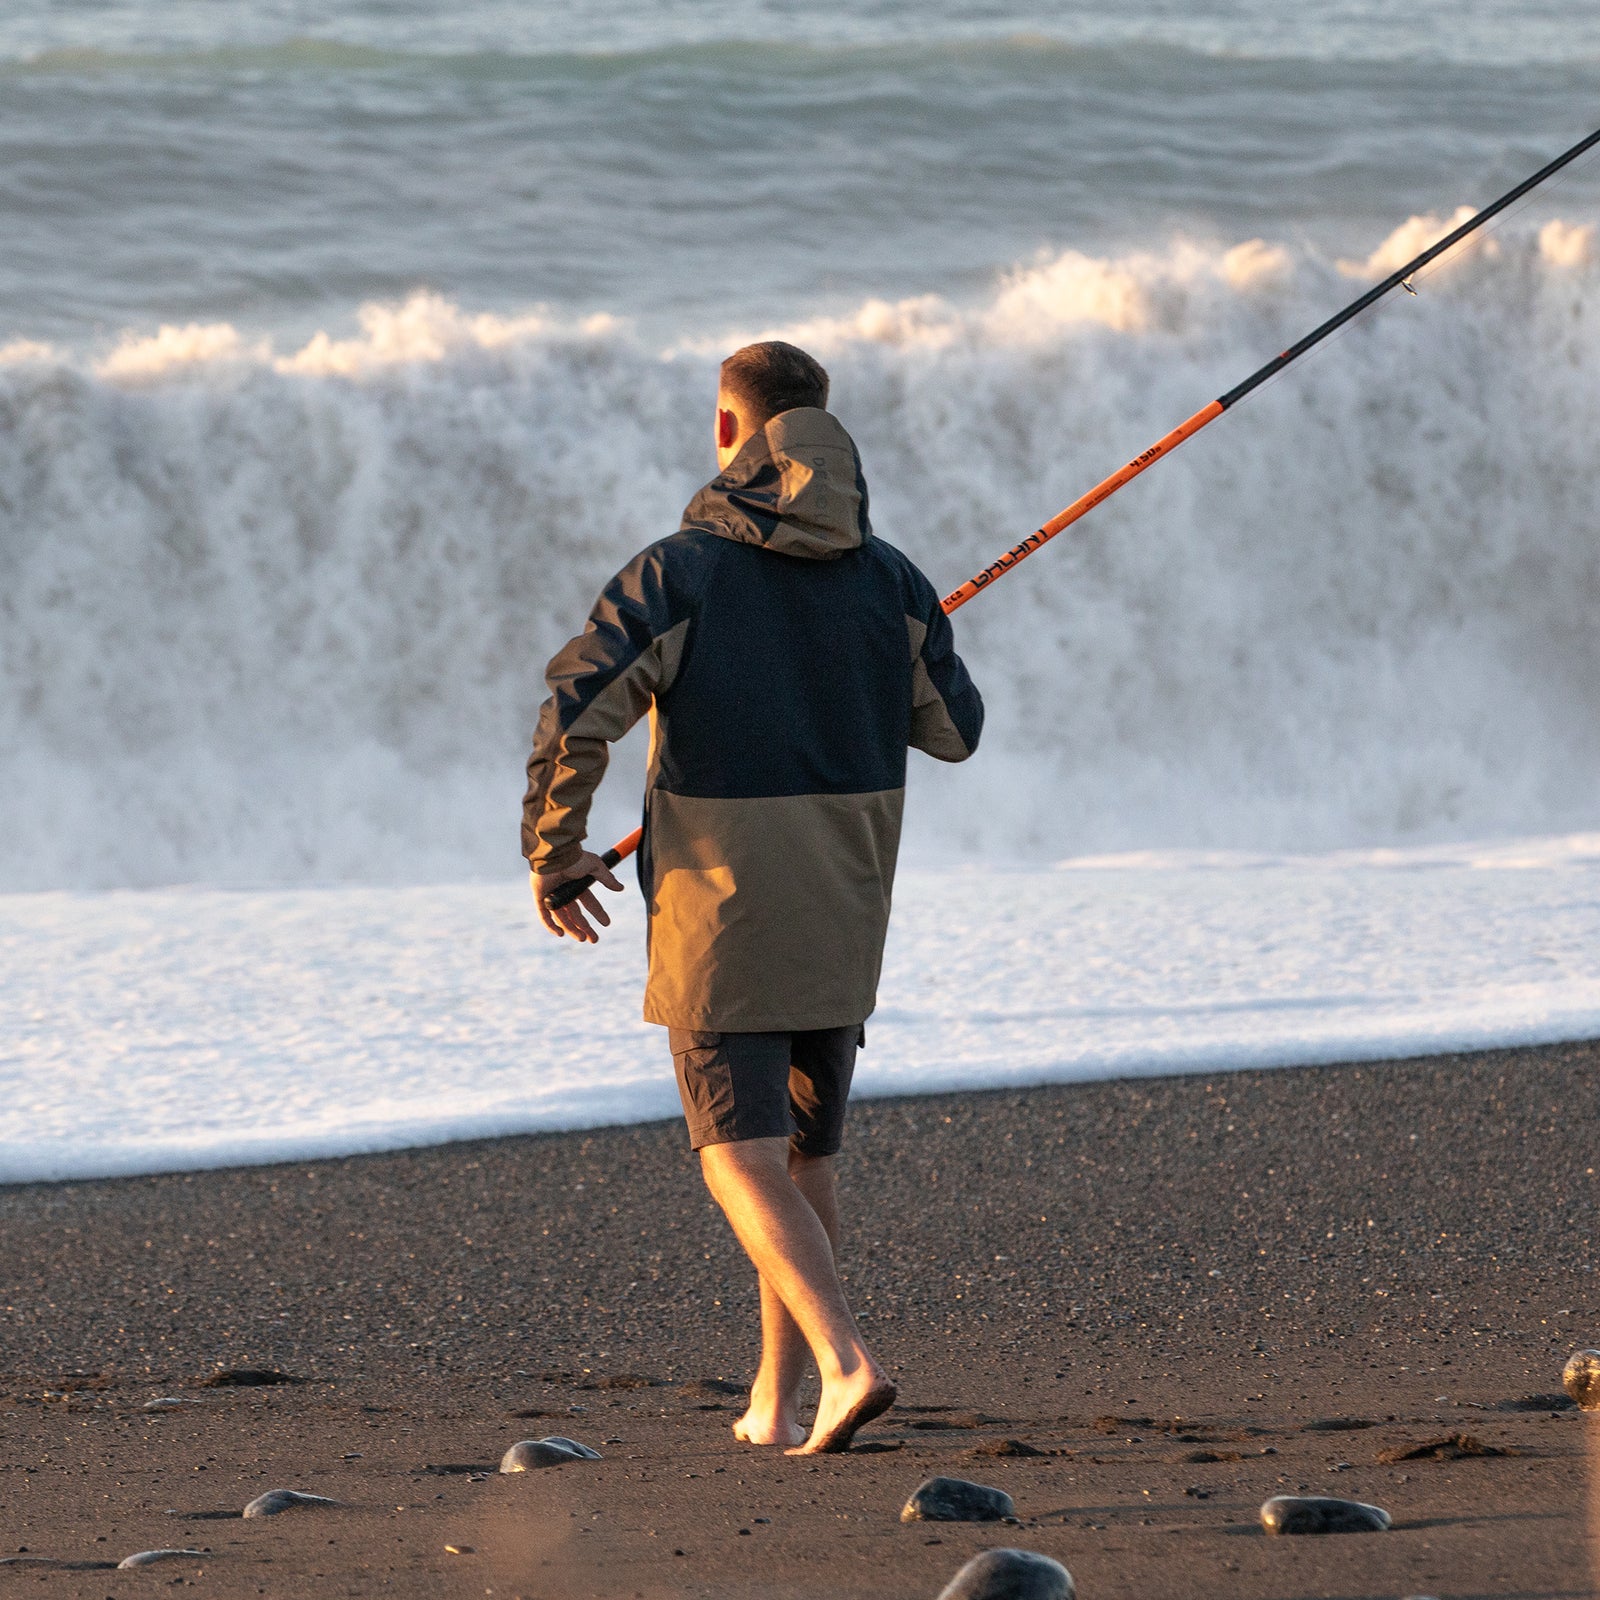 NZ Fly Fishing Gear, Desolve, Exceptional Performance & Durability -  Desolve Supply Co.